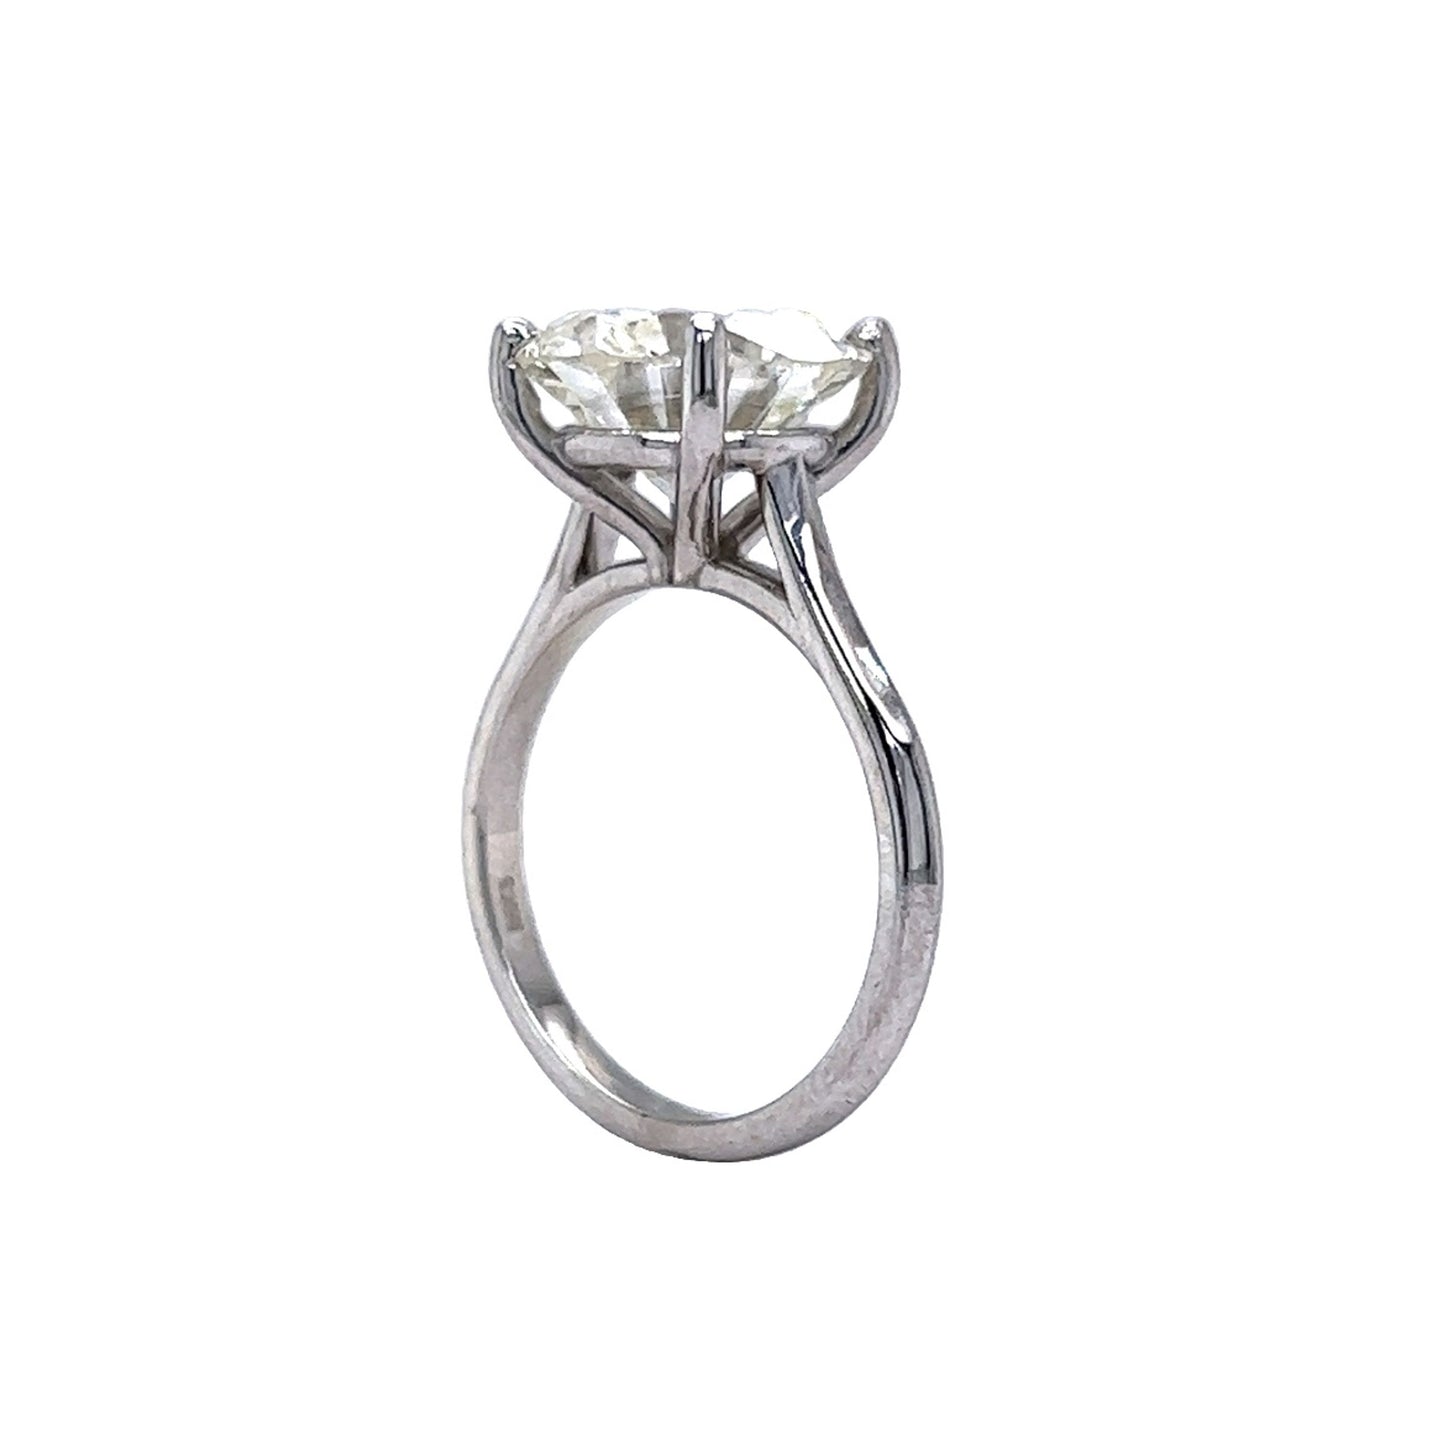 5.04 Round Brilliant Diamond Solitaire Engagement Ring in 14k White Gold